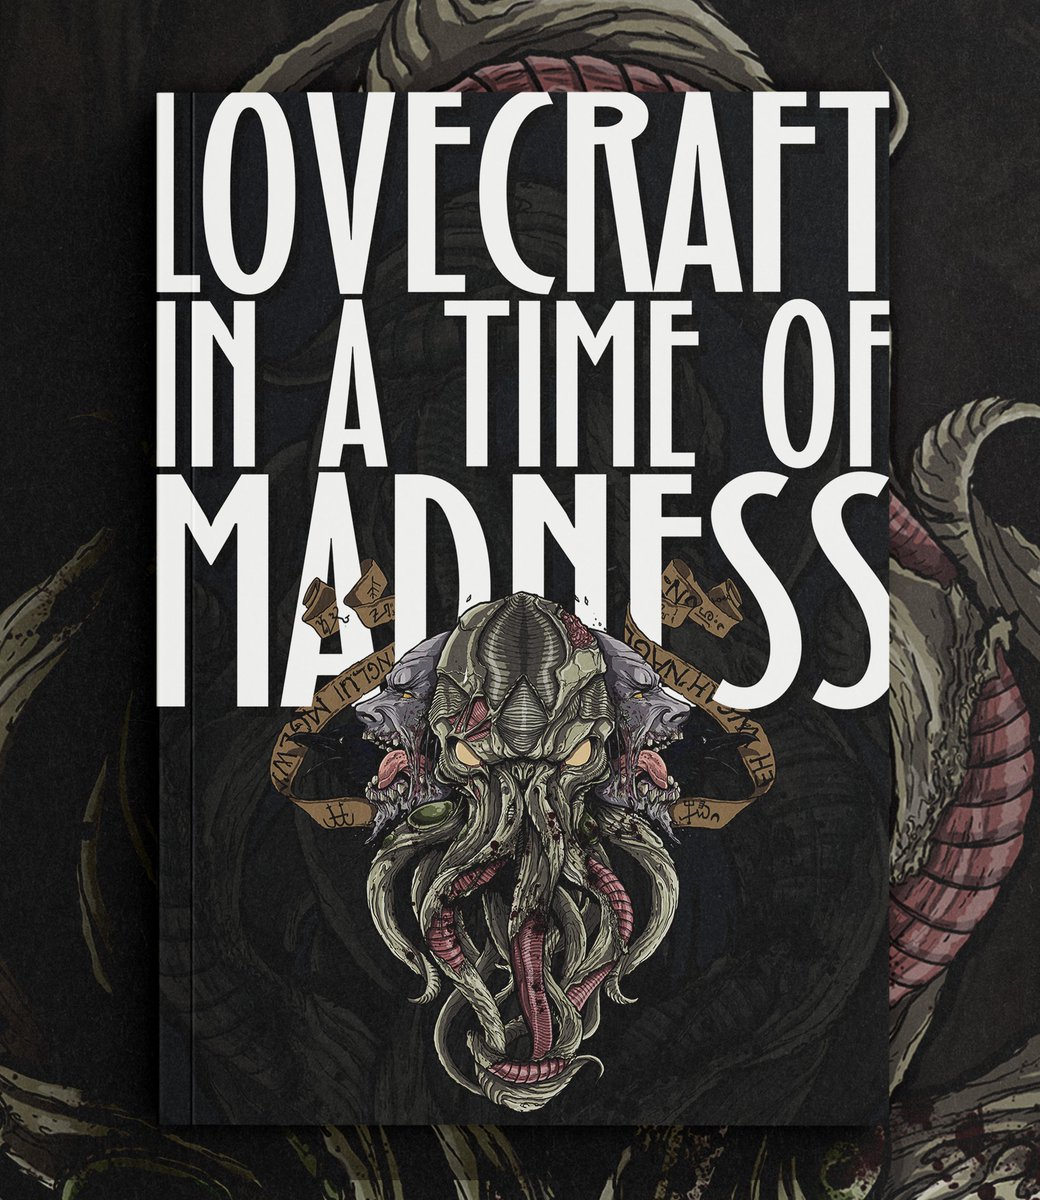 21 Tales of Lovecraftian Horror. 
Available from Amazon and Audible!